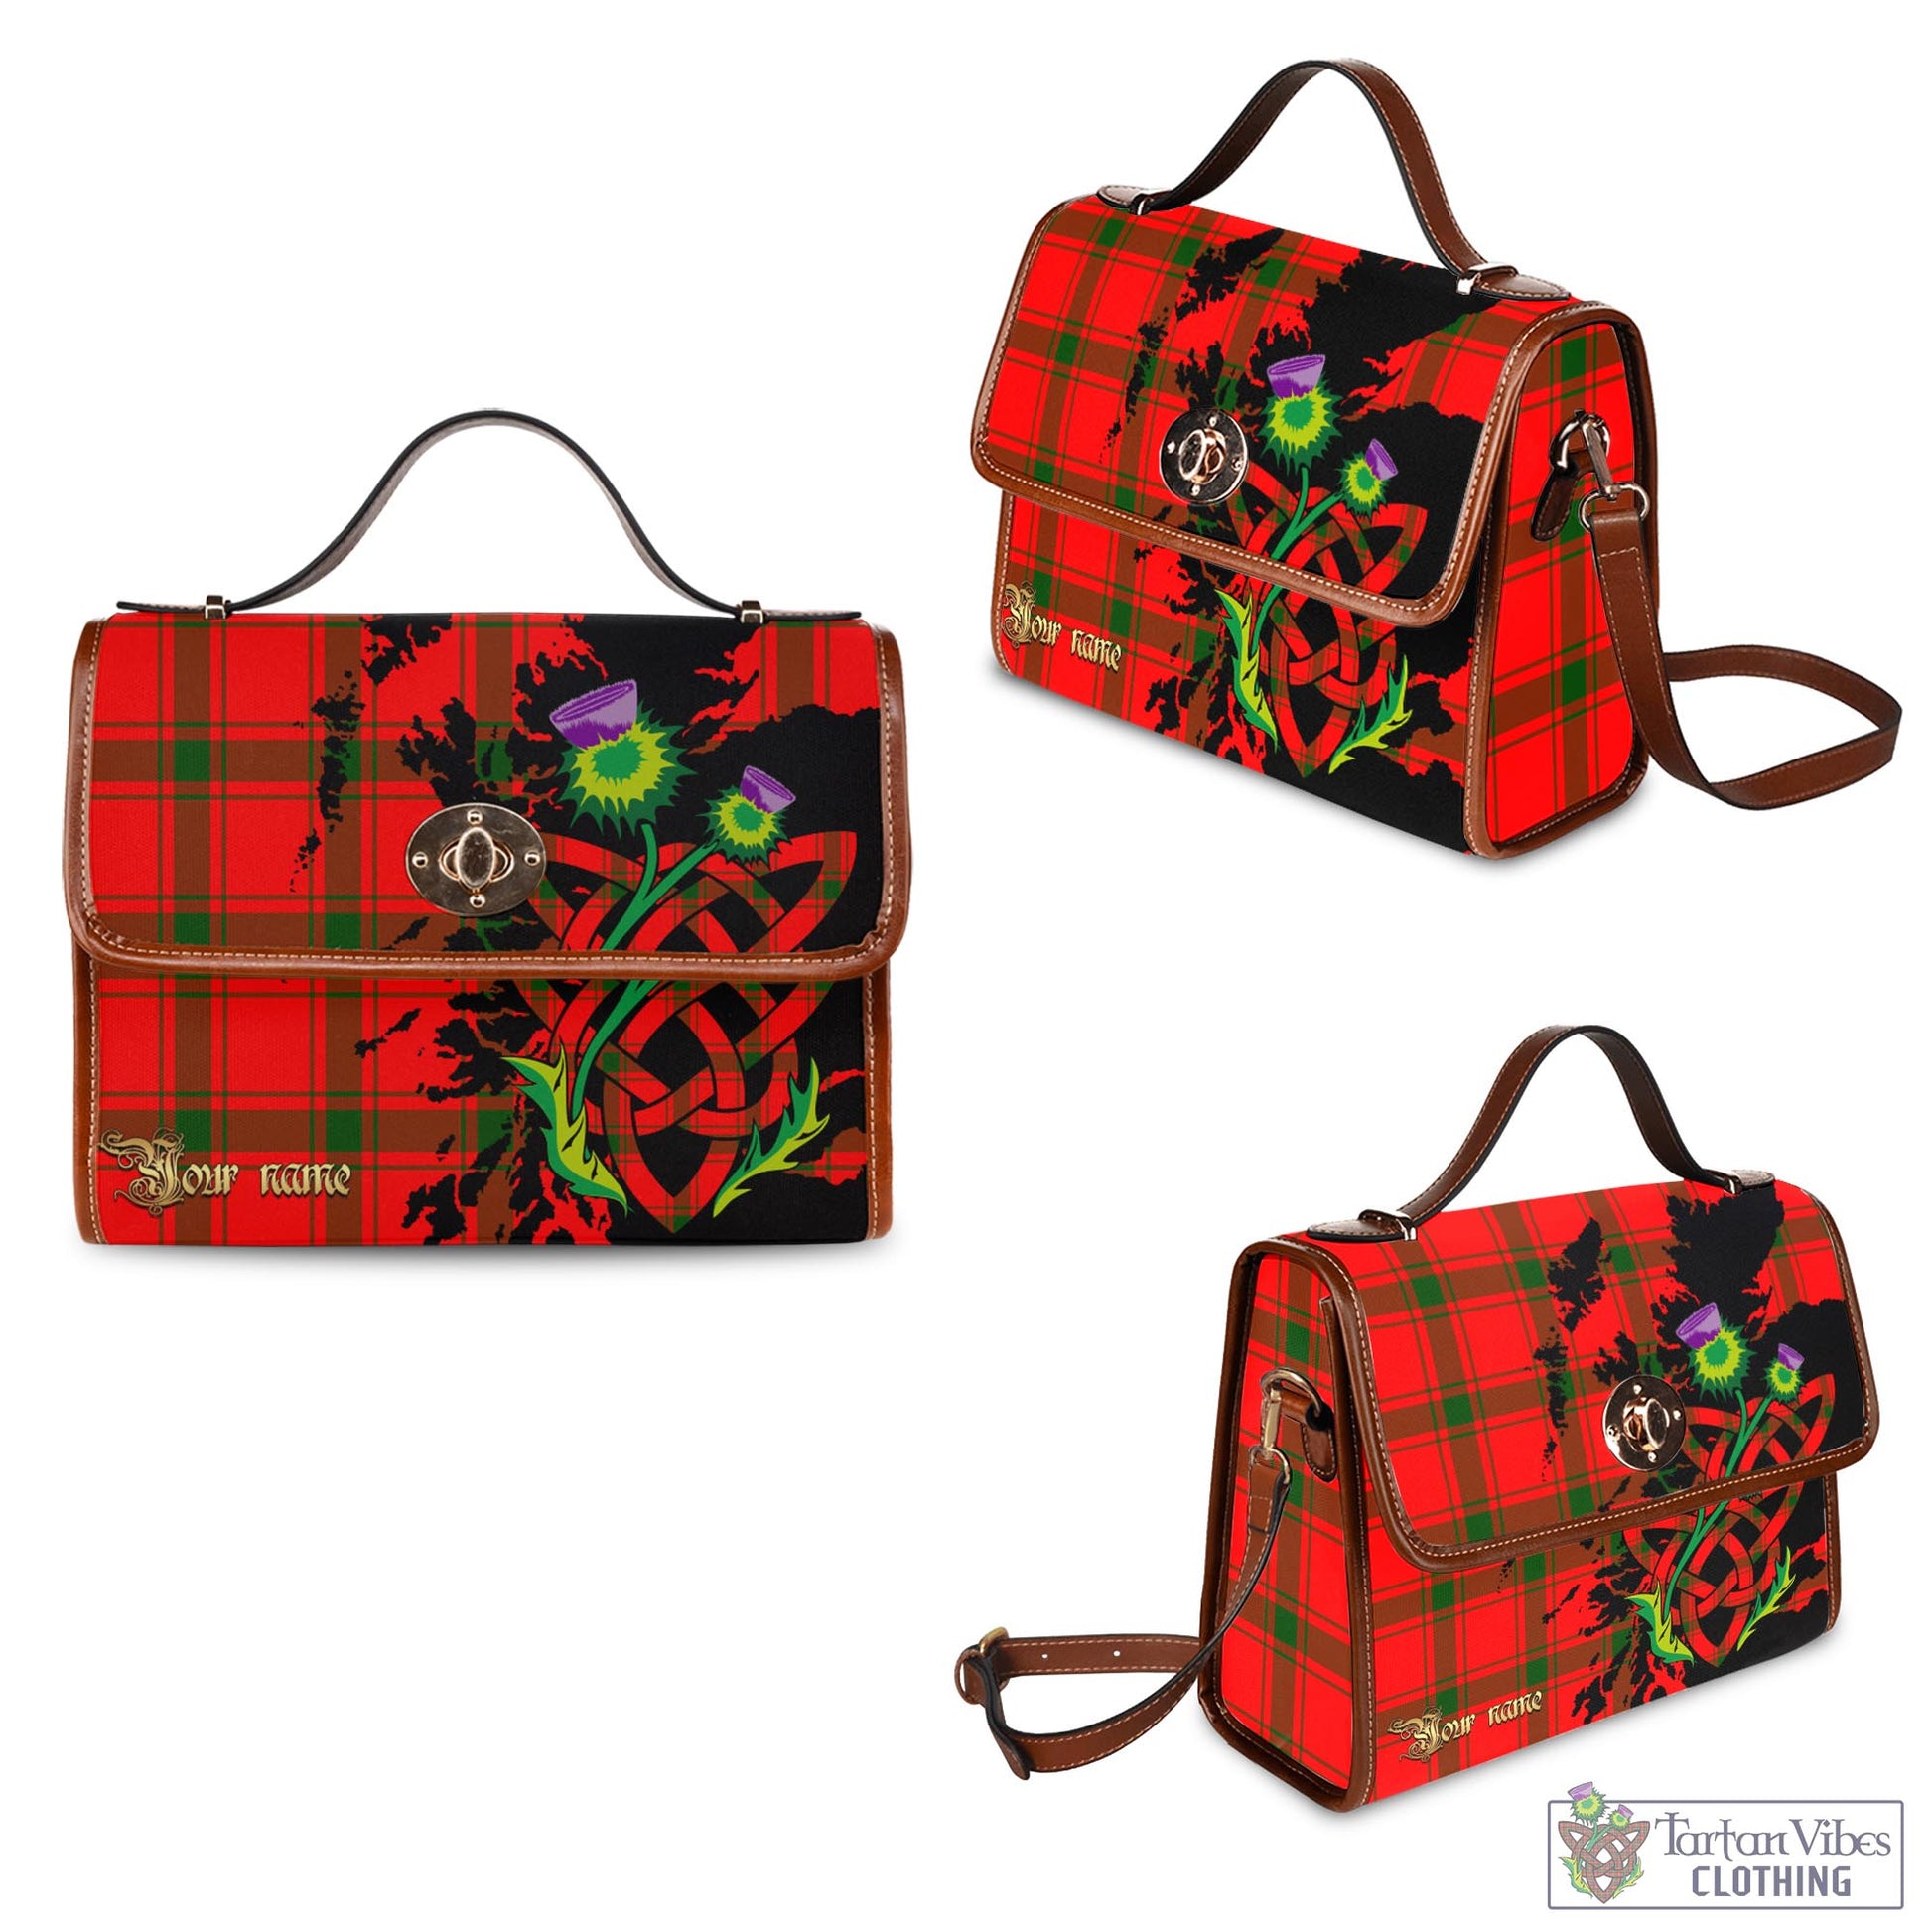 Tartan Vibes Clothing Darroch Tartan Waterproof Canvas Bag with Scotland Map and Thistle Celtic Accents